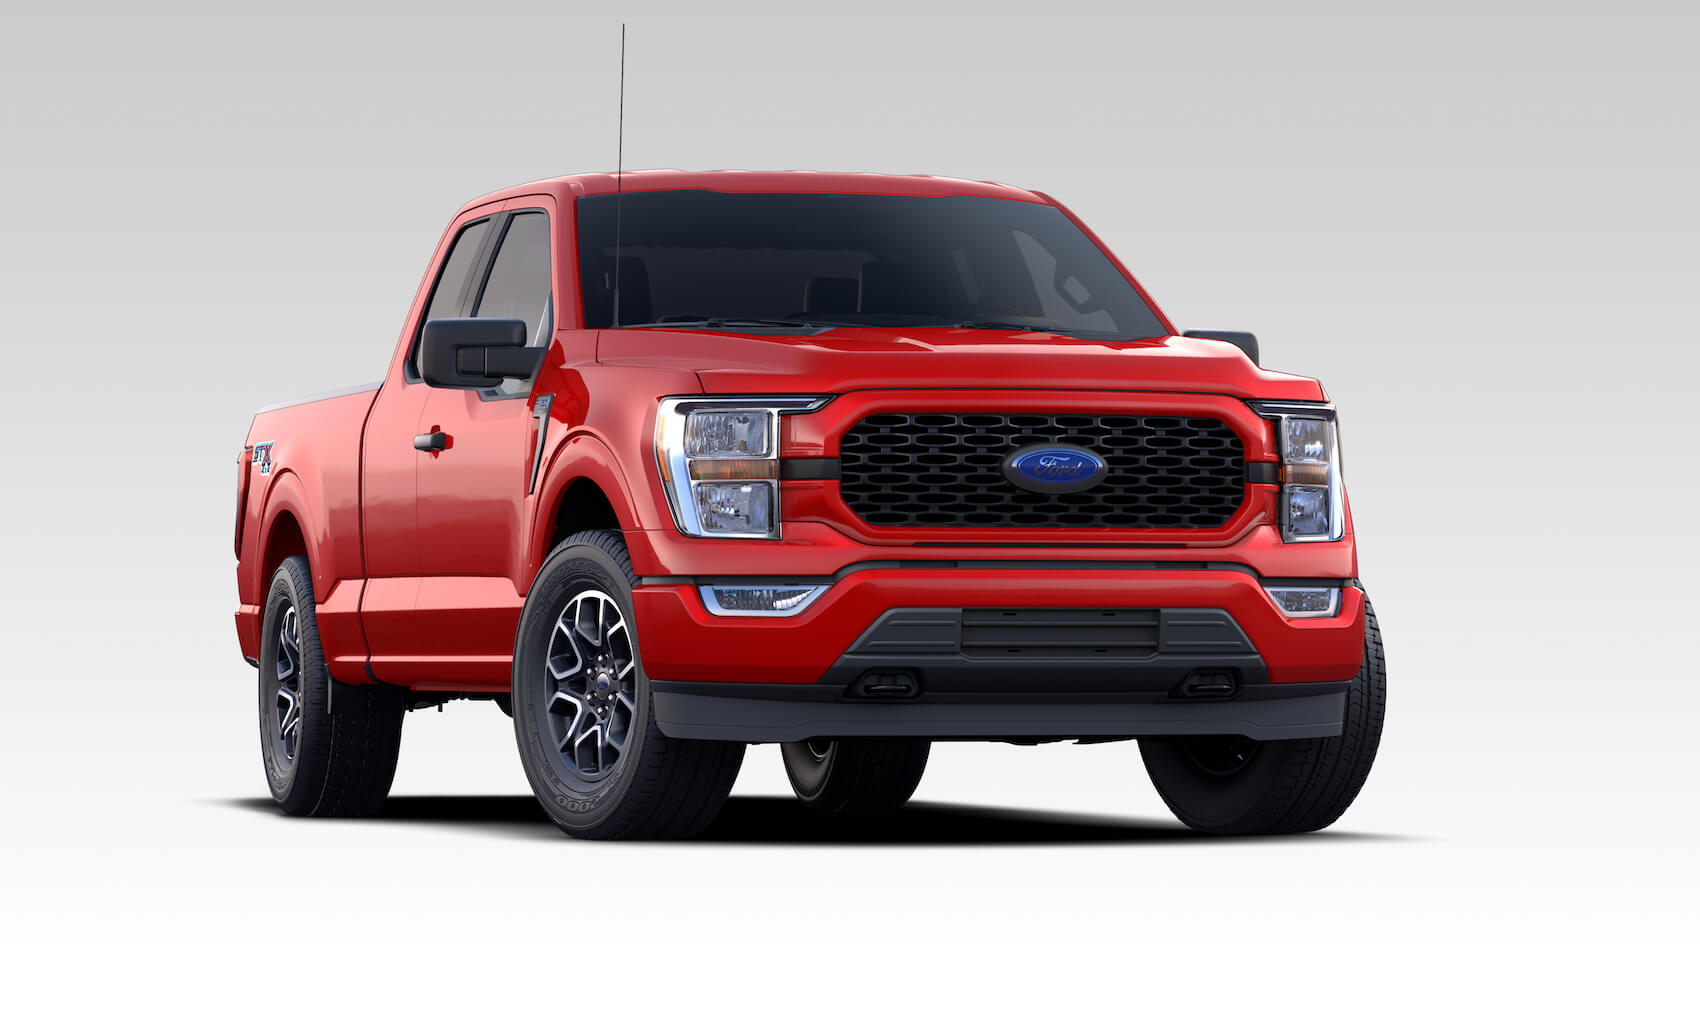 2021 Ford F-150 performance and power